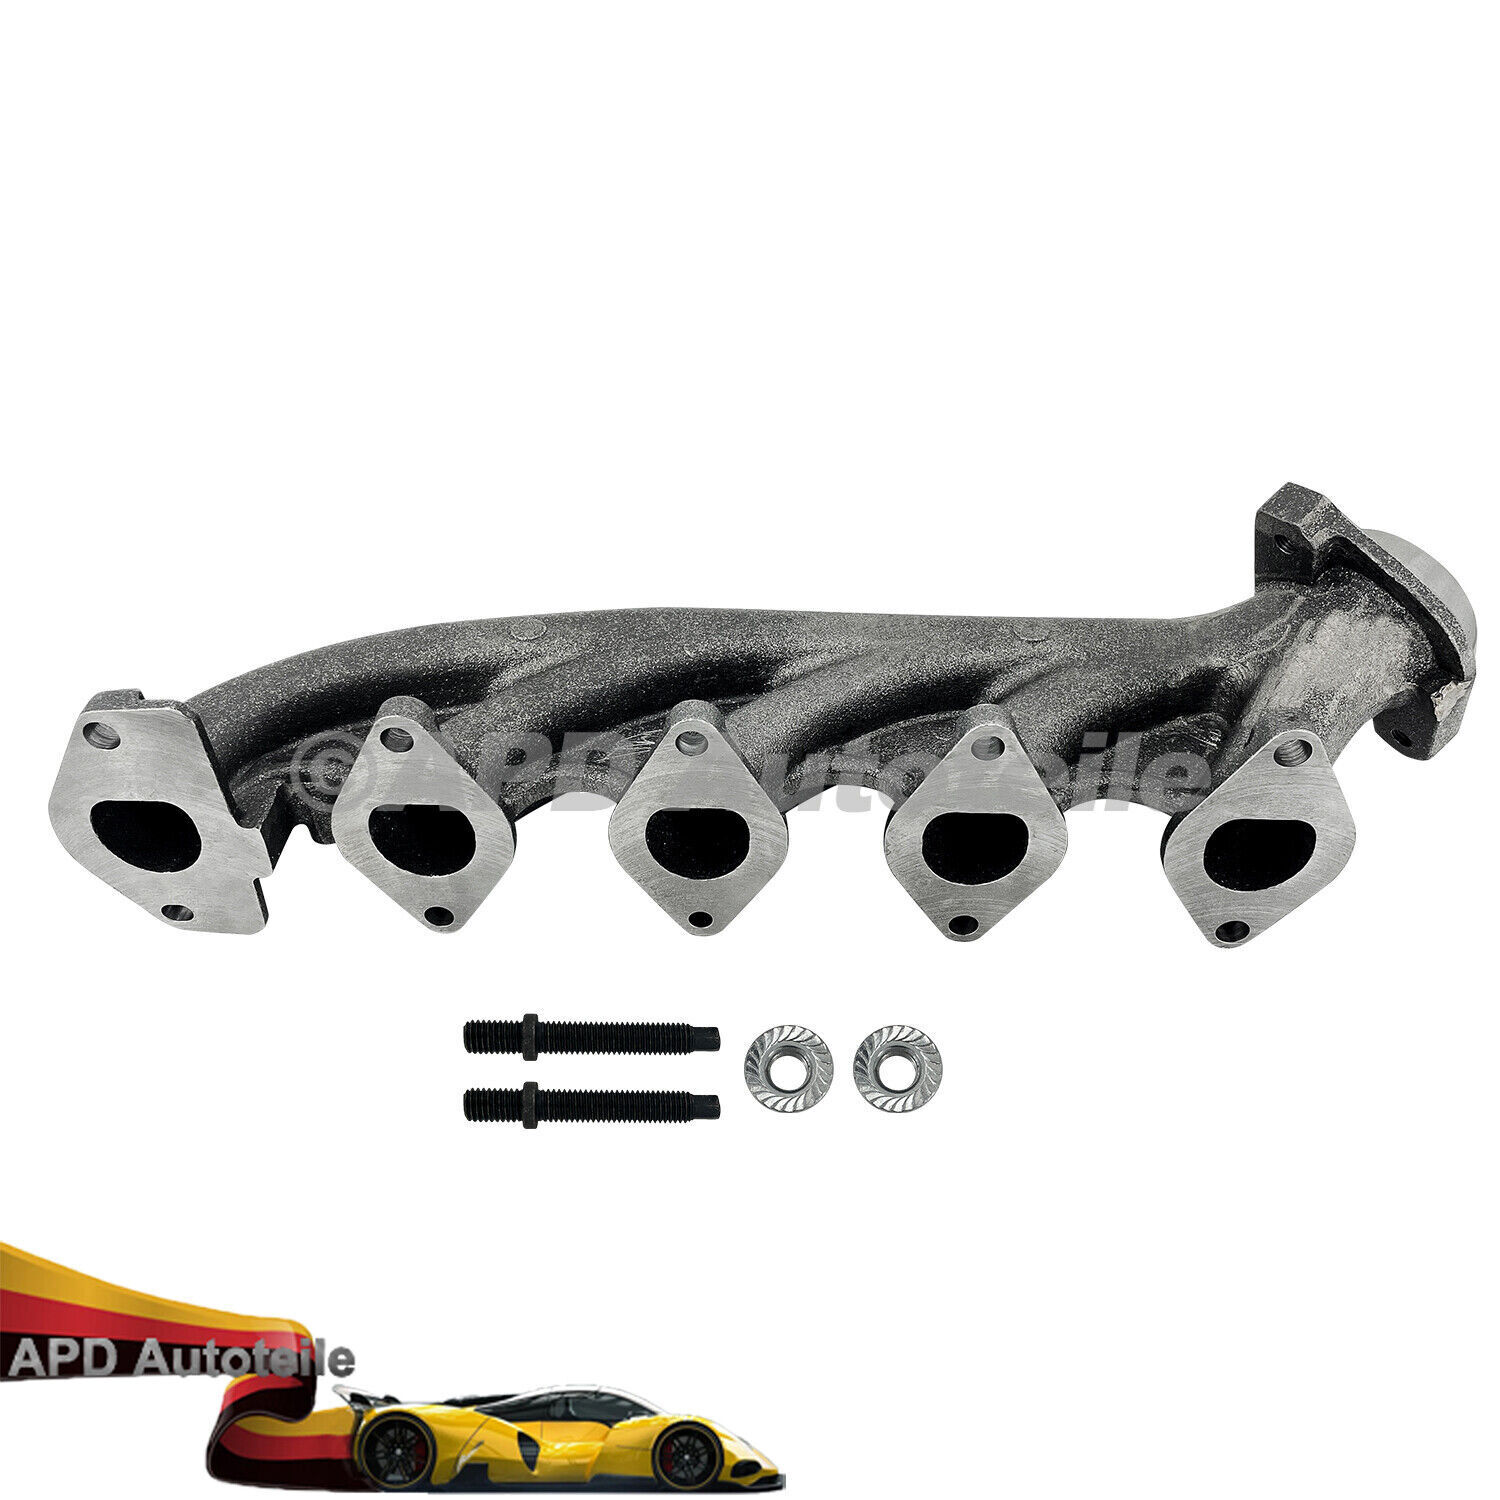 Left Exhaust Manifold Driver Side For 2005-10 Ford F250 Super Duty Pickup 6.8L